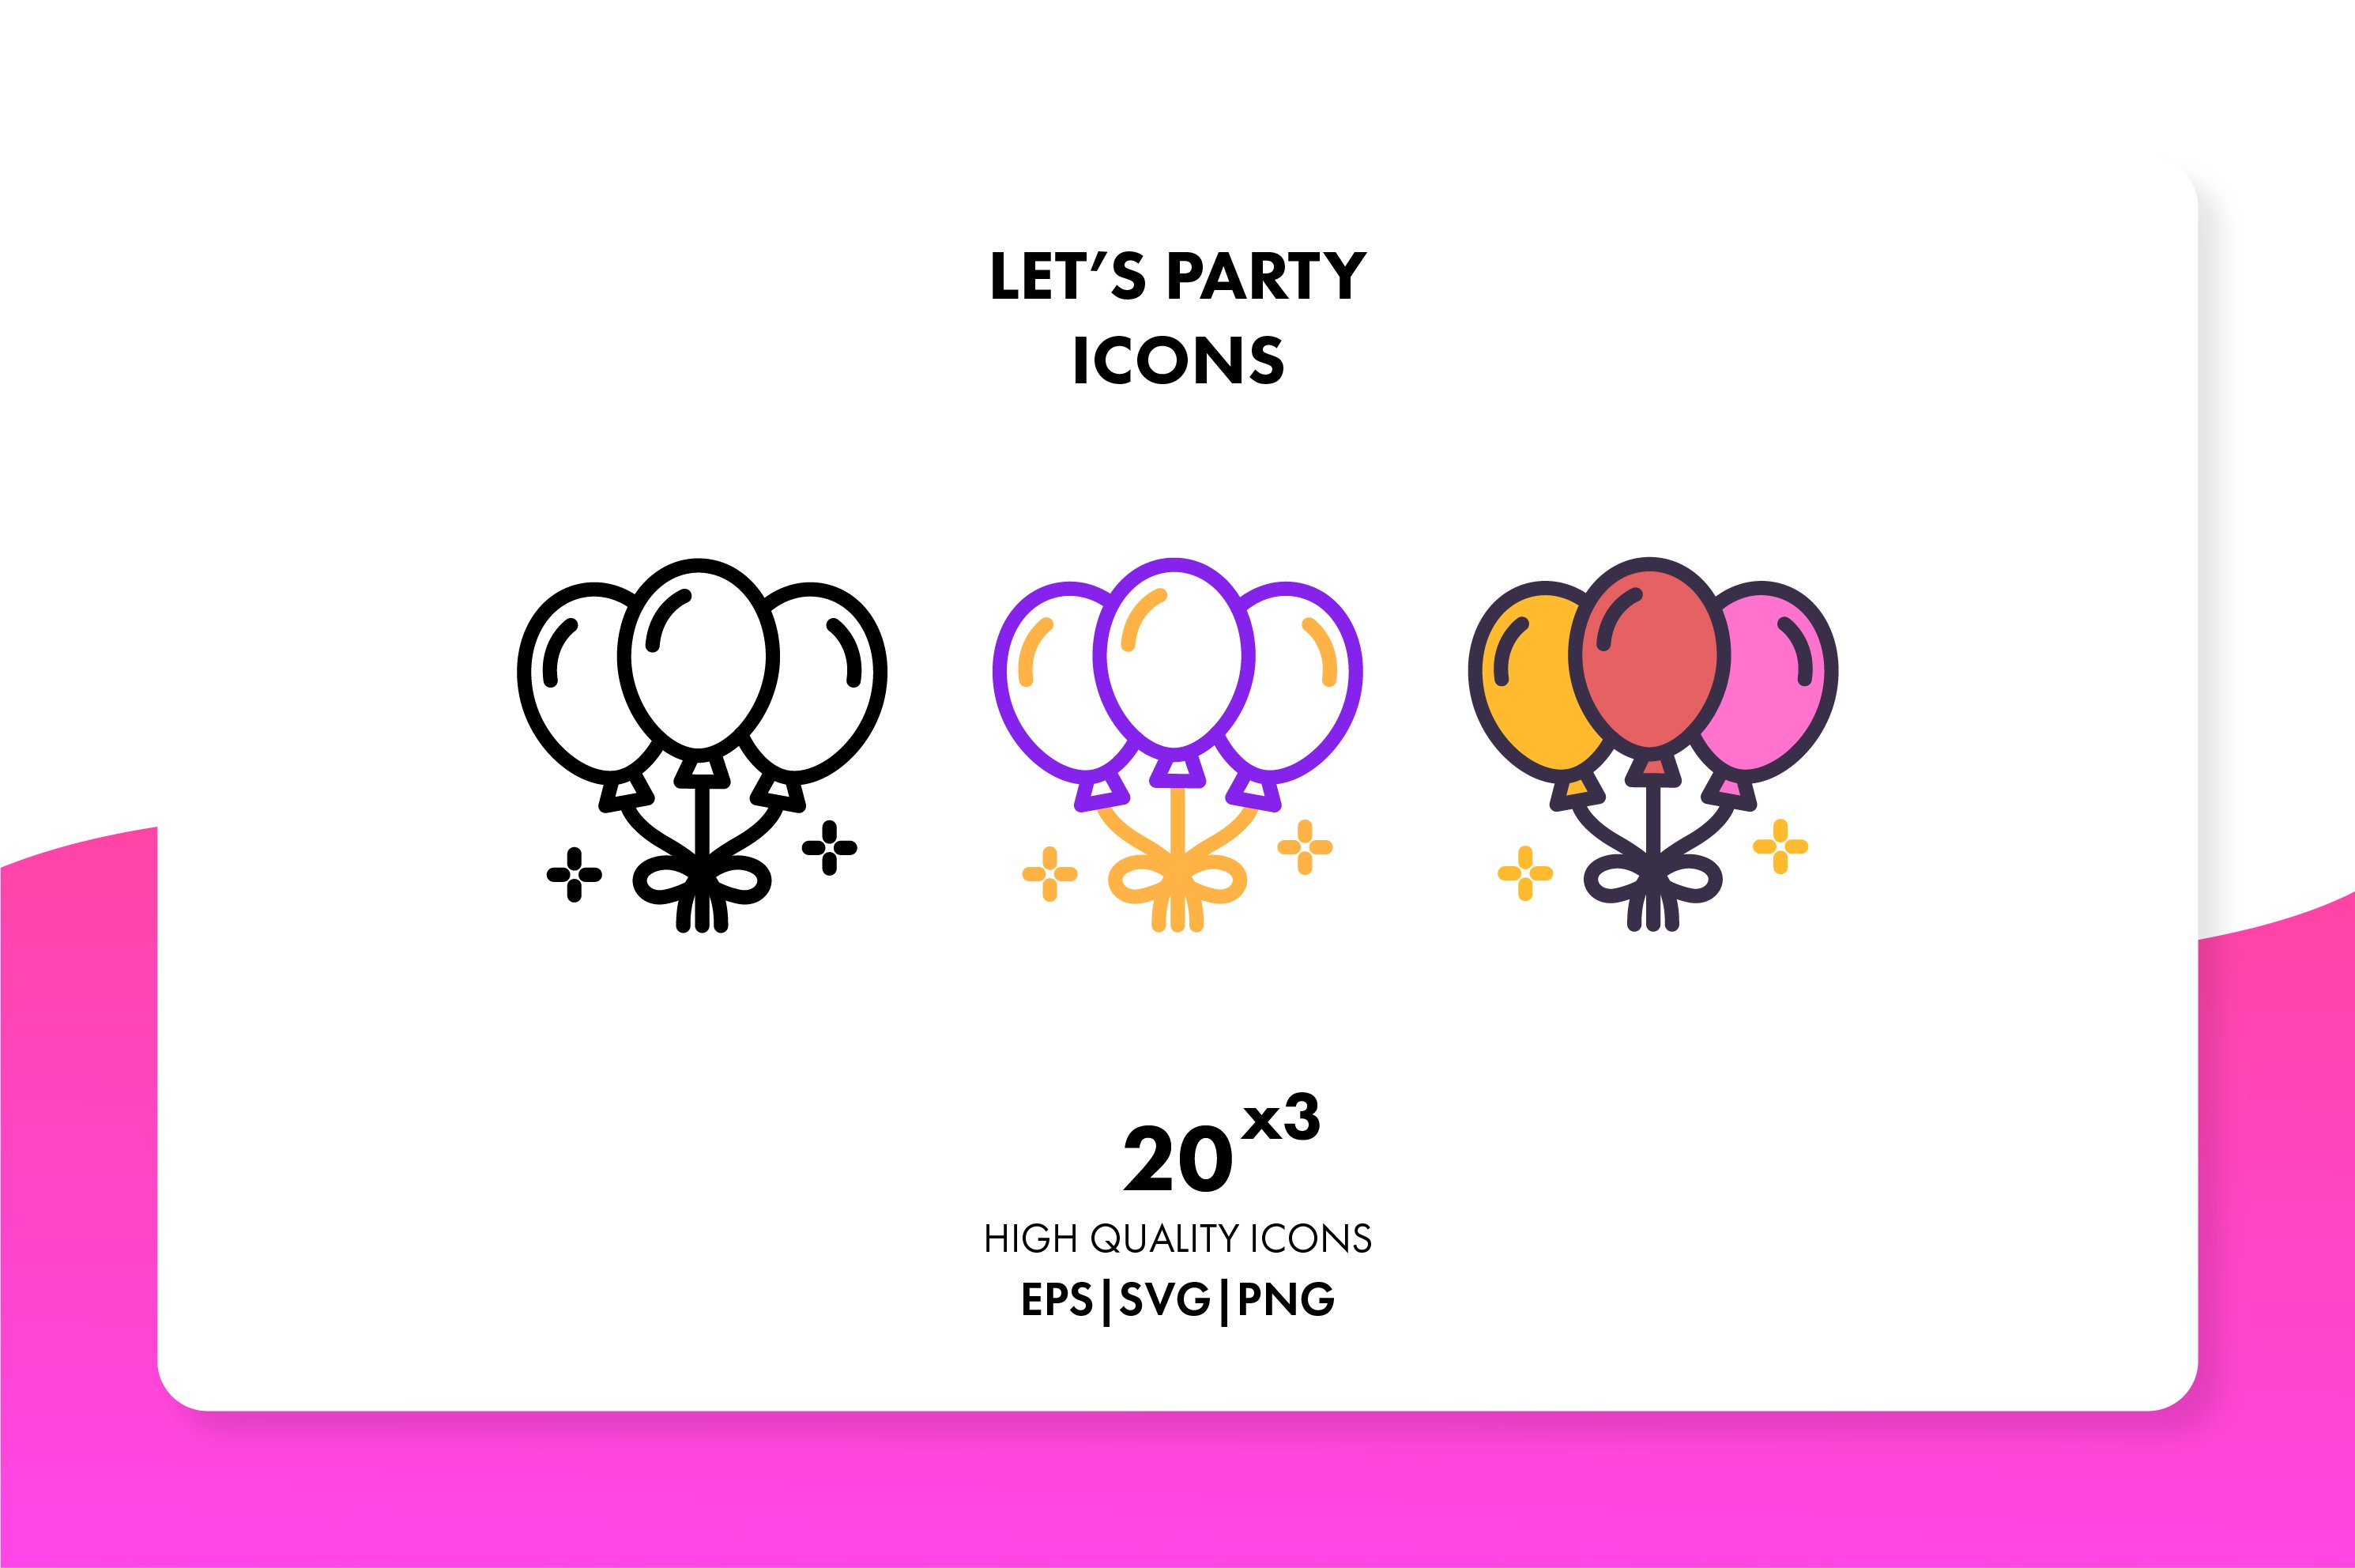 Let's Party Icons cover image.